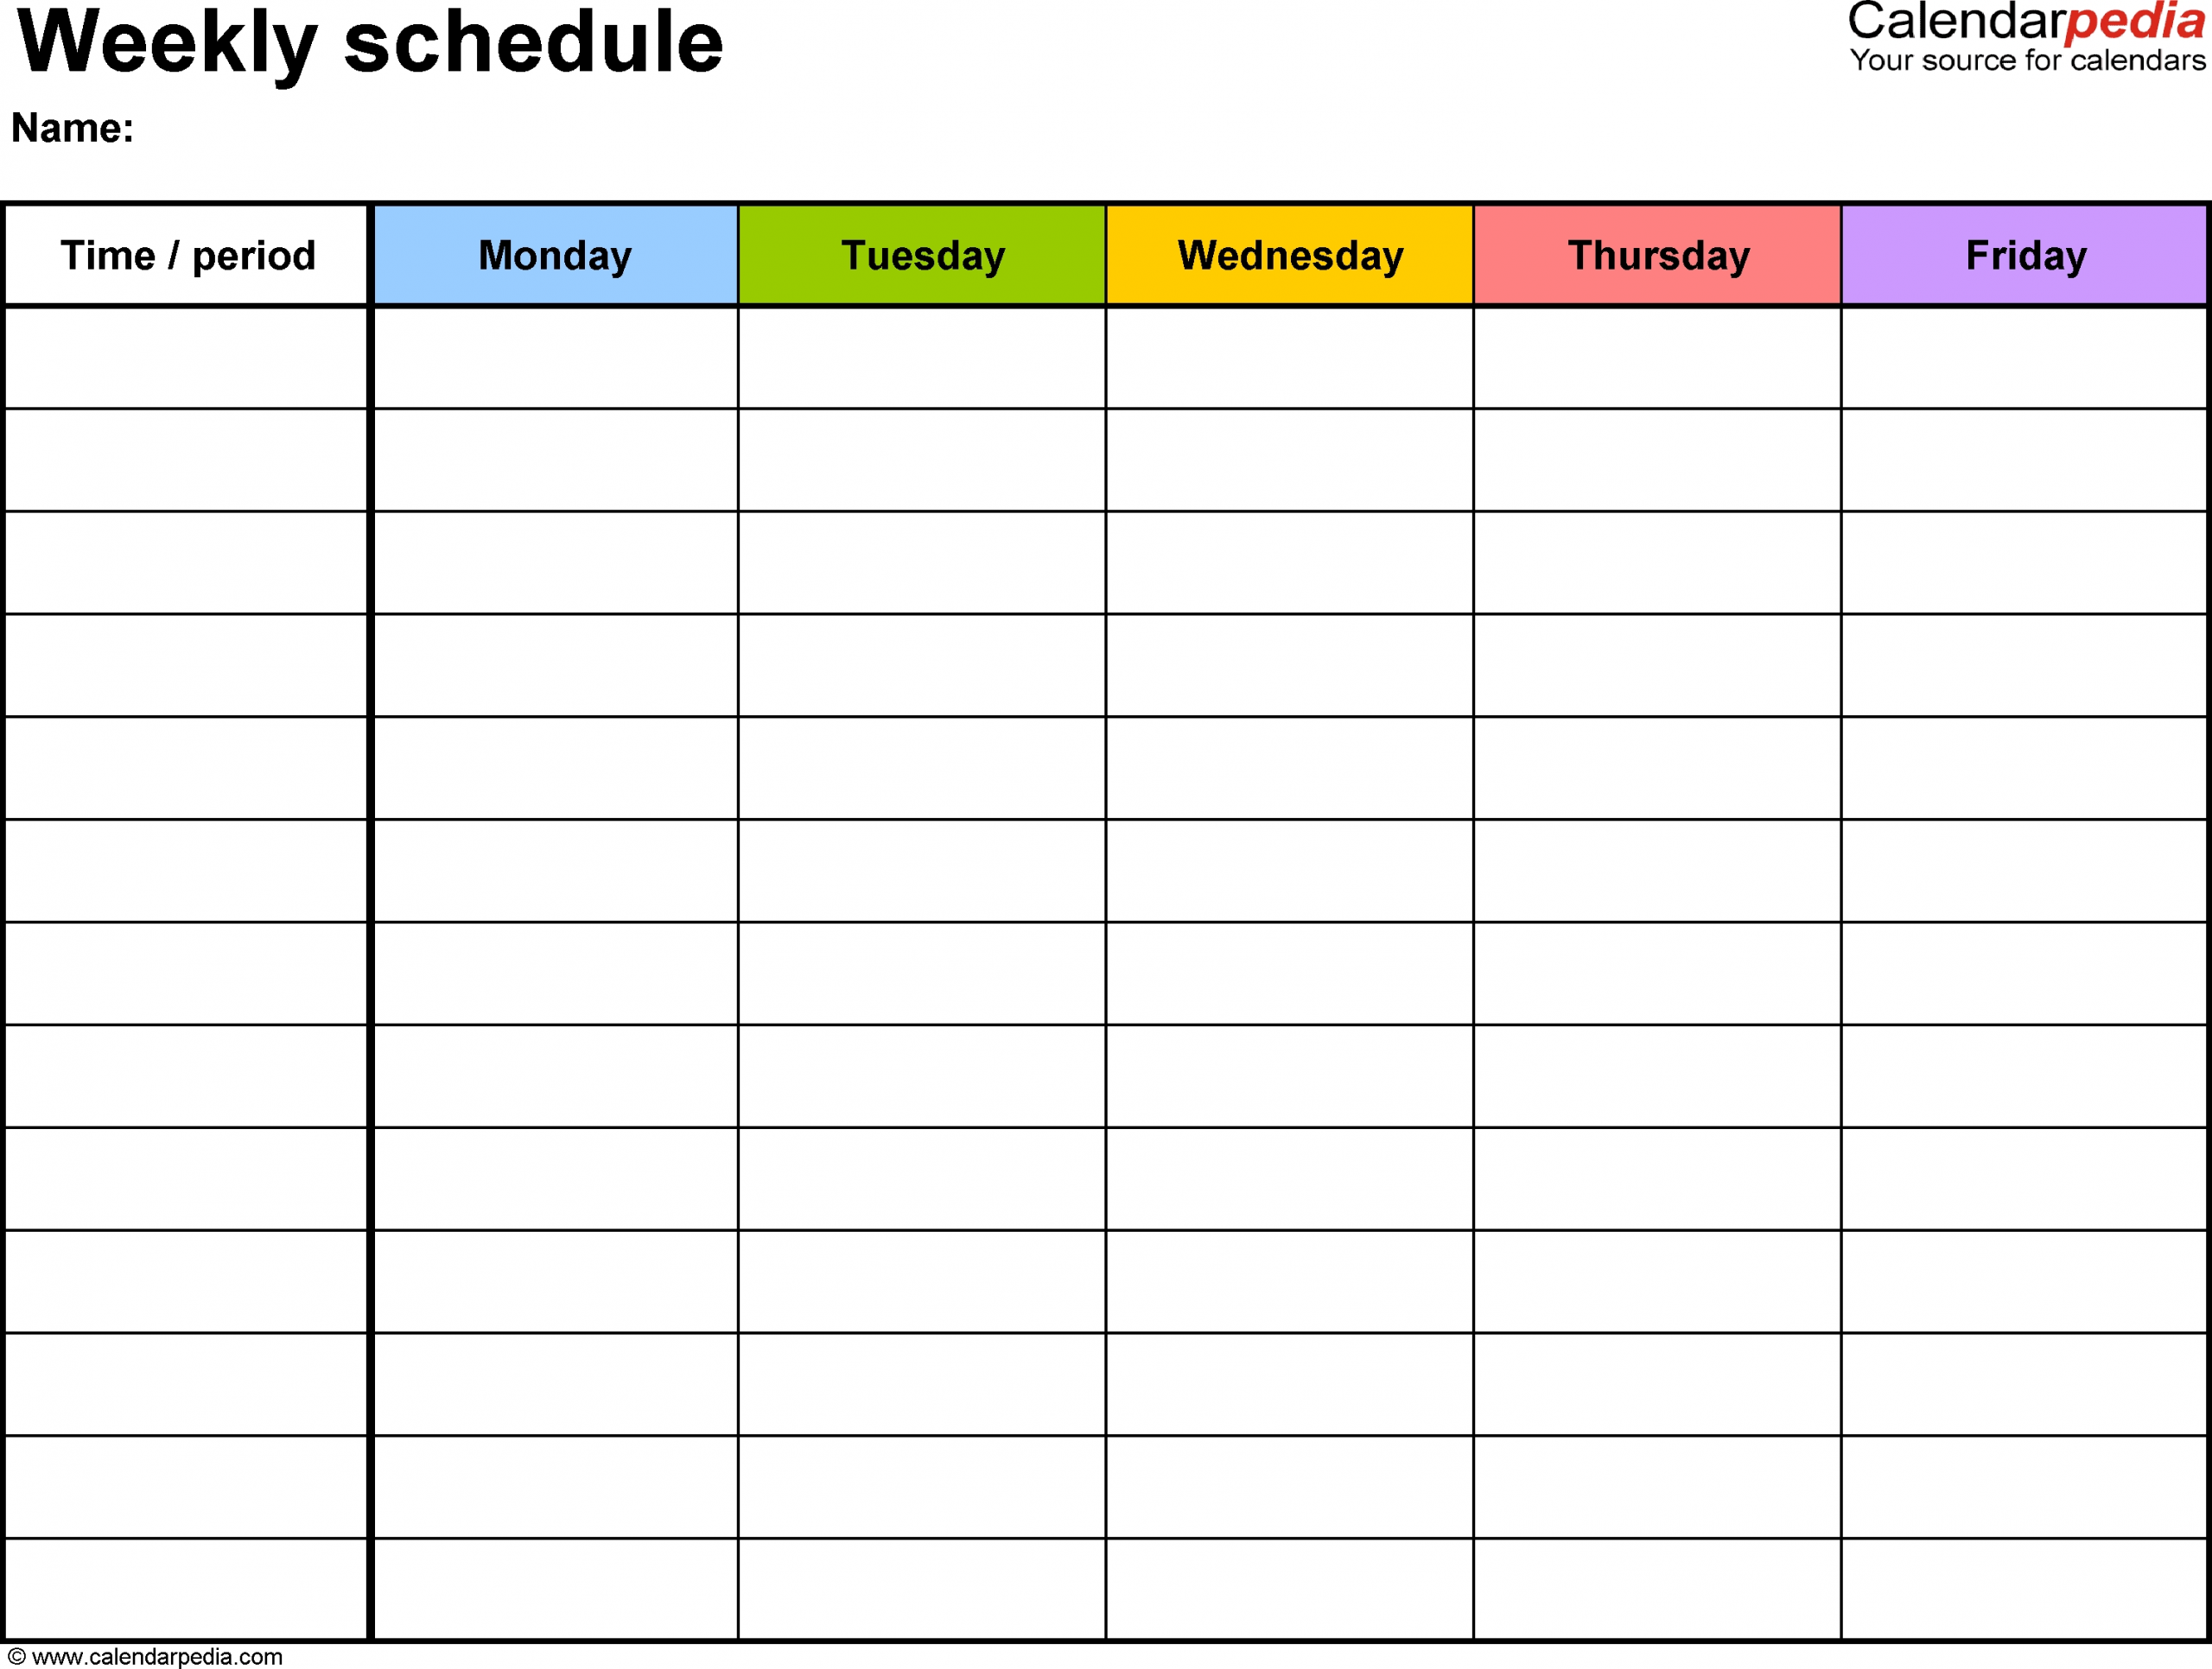 Free Weekly Schedule Templates For Word - 18 Templates with 7 Day A Week Calendar